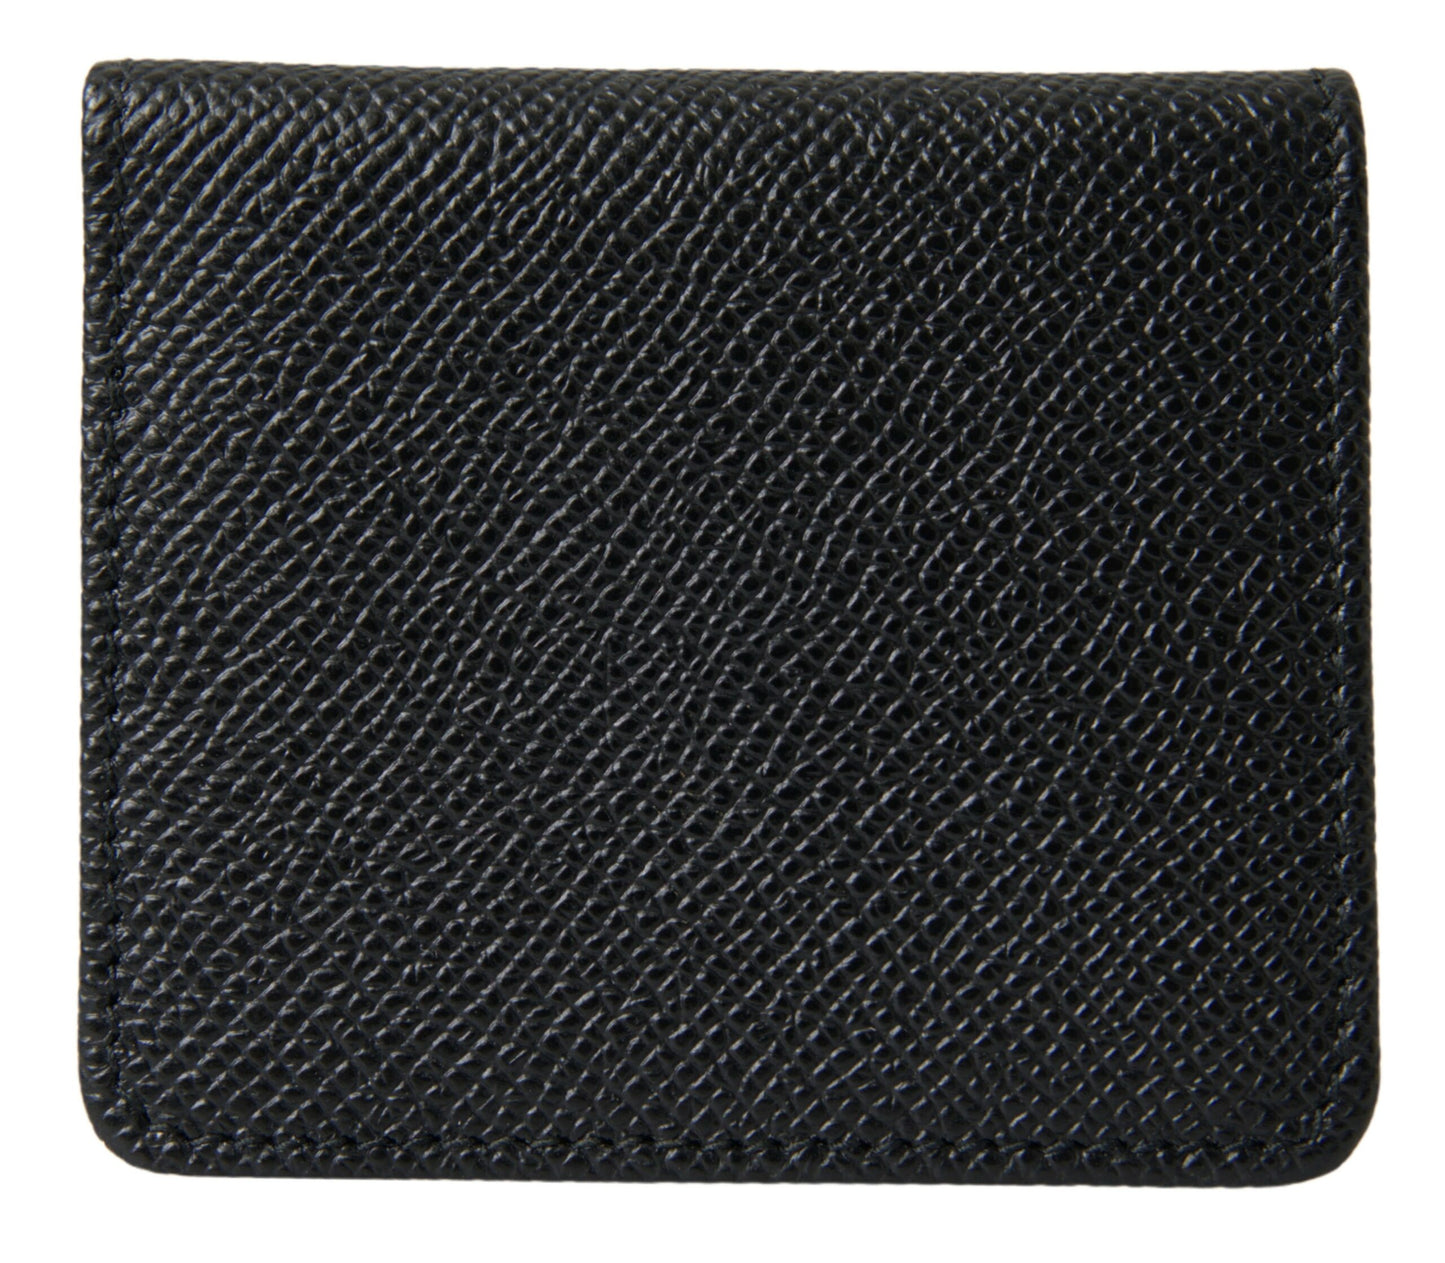 Elegant Leather Bifold Coin Purse Wallet